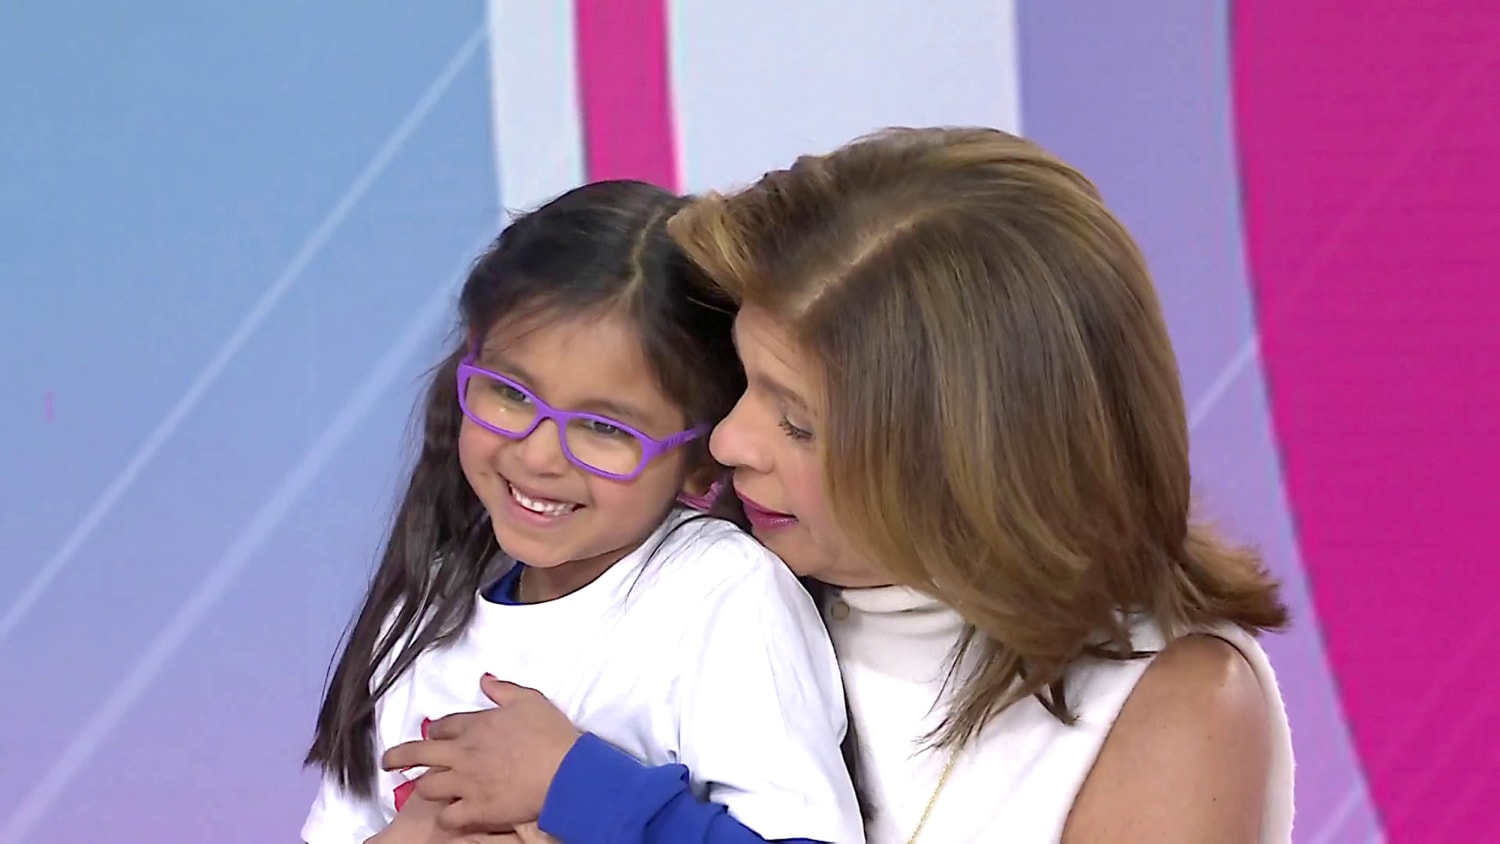 Hoda Kotb brings her daughter Haley’s class to the TODAY Show for the ultimate field trip